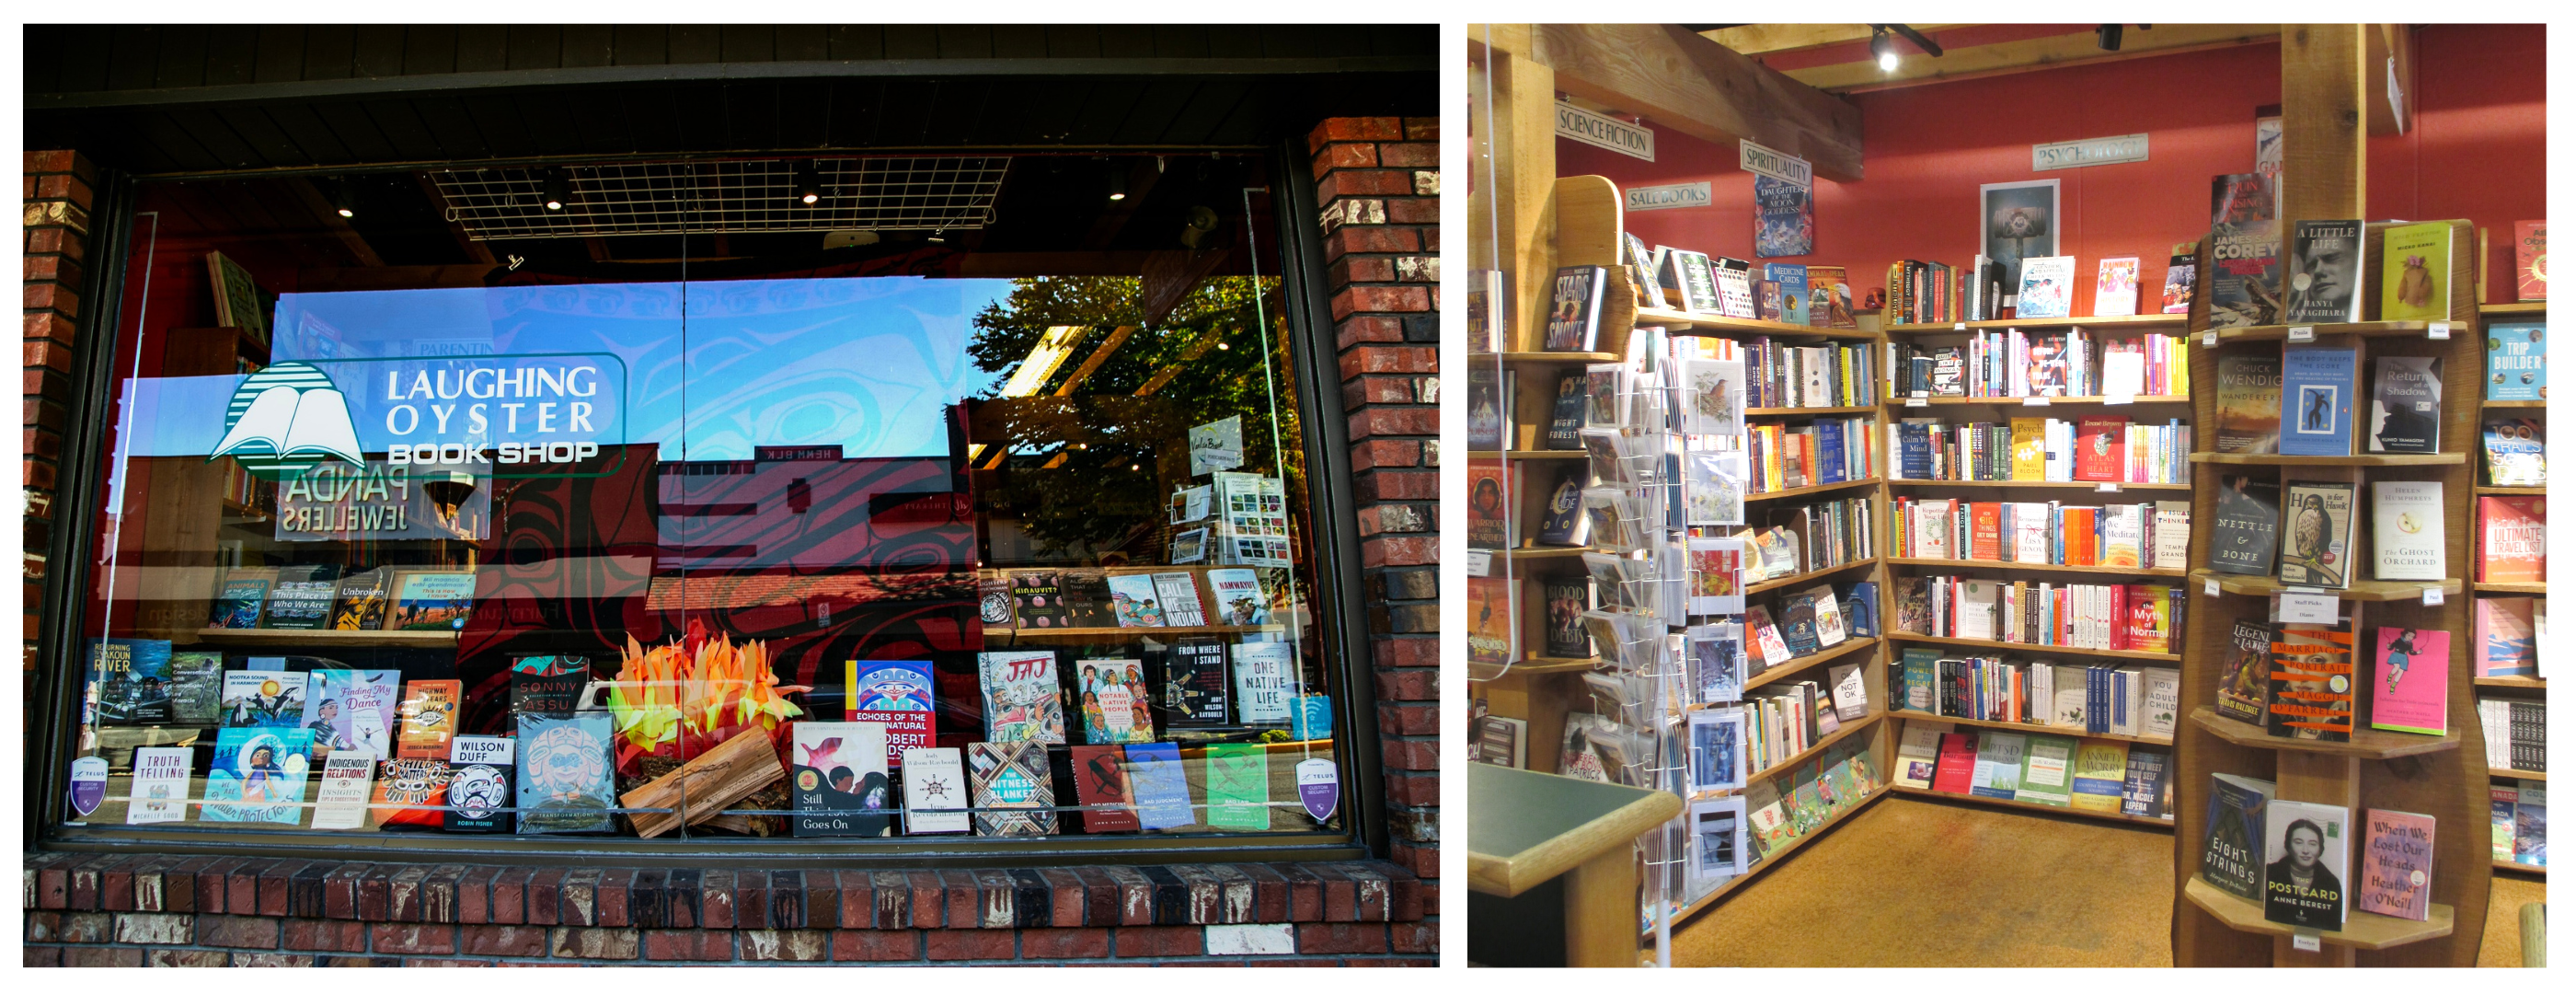 A photo of the window display of Laughing Oyster Bookshop and a photo of the interior bookshelves.